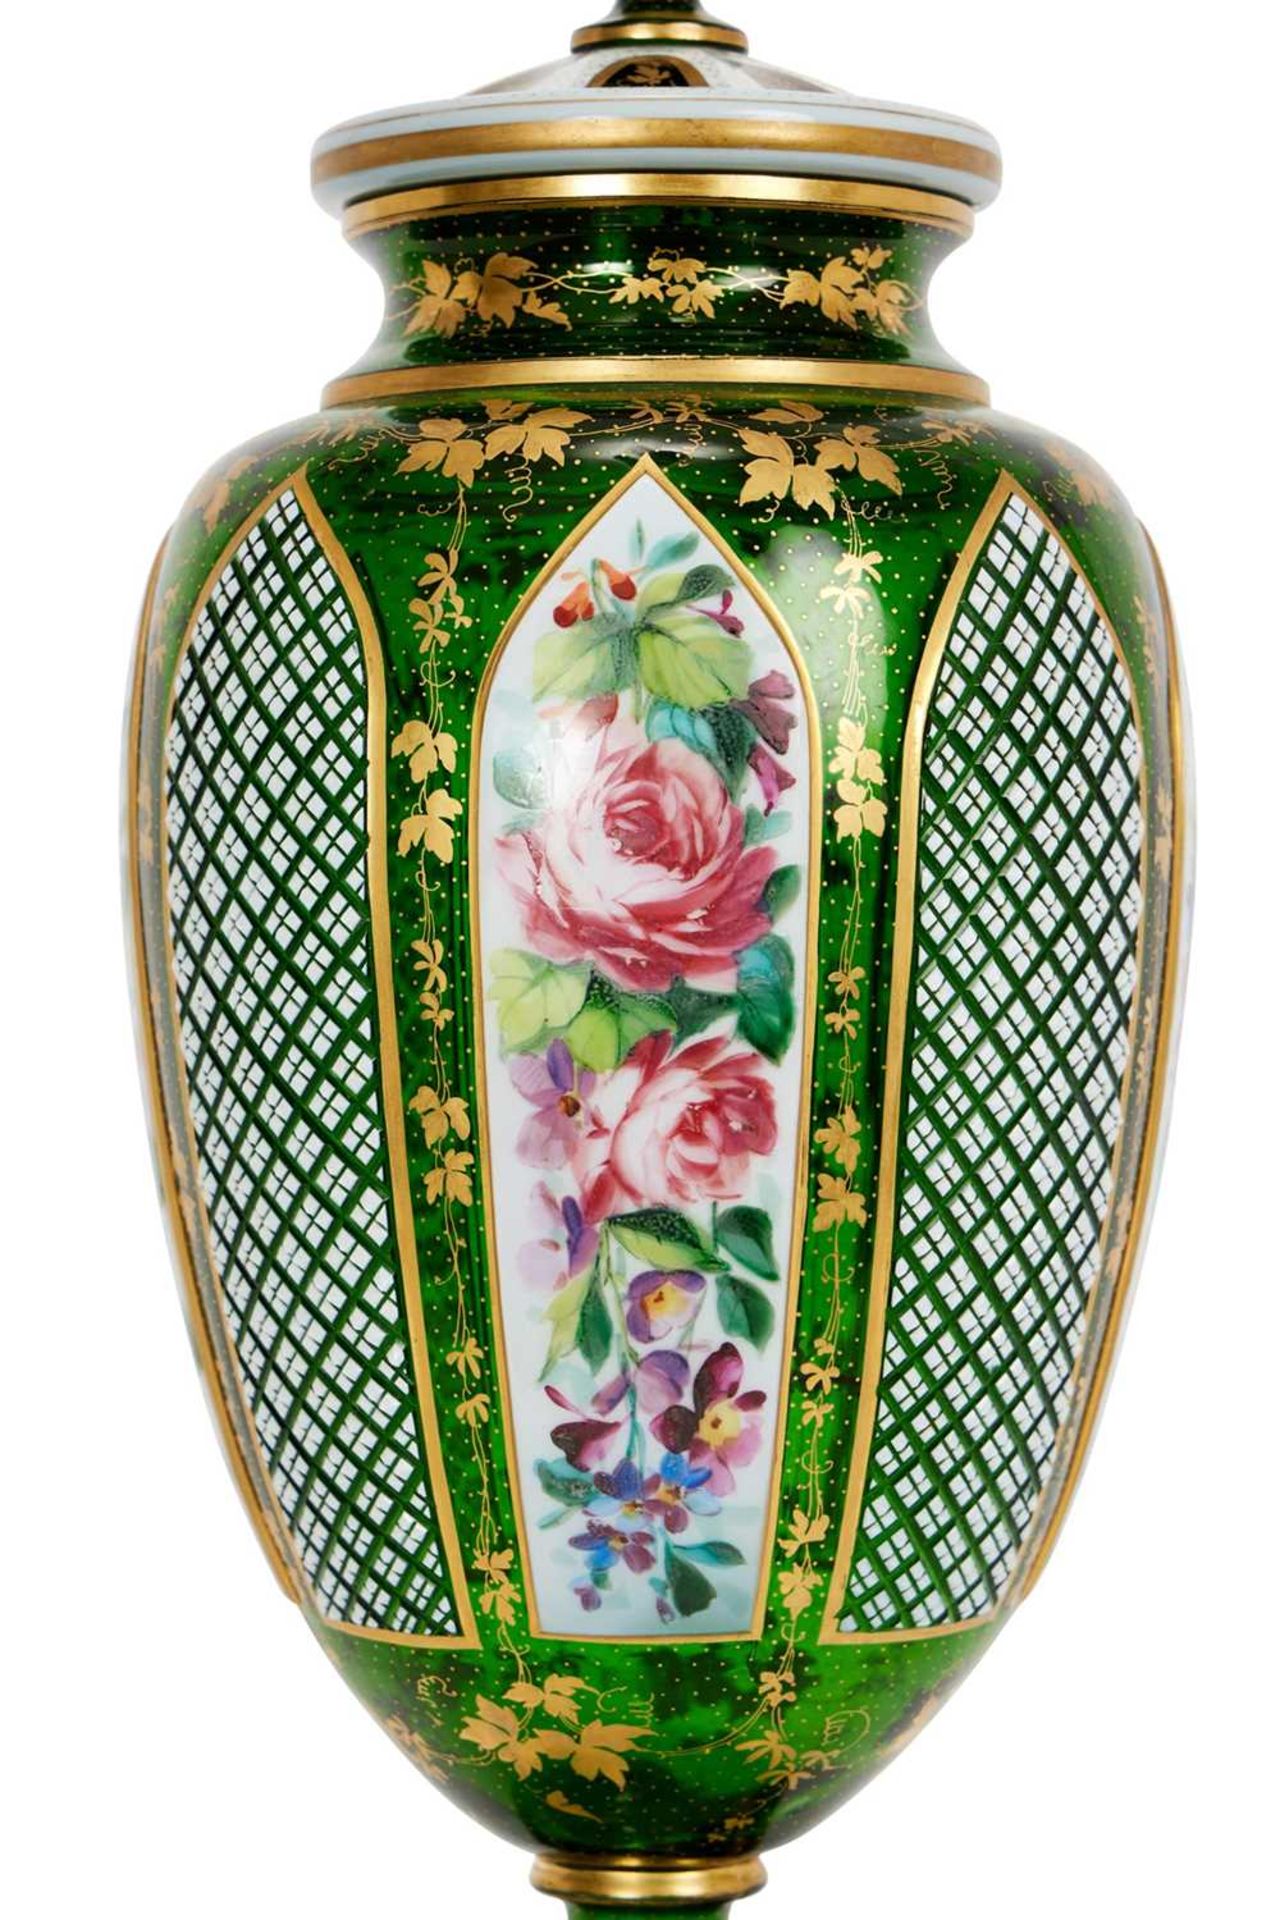 A FINE 19TH CENTURY BOHEMIAN CUT, FLASHED AND OVERLAY GLASS VASE AND COVER - Image 2 of 2